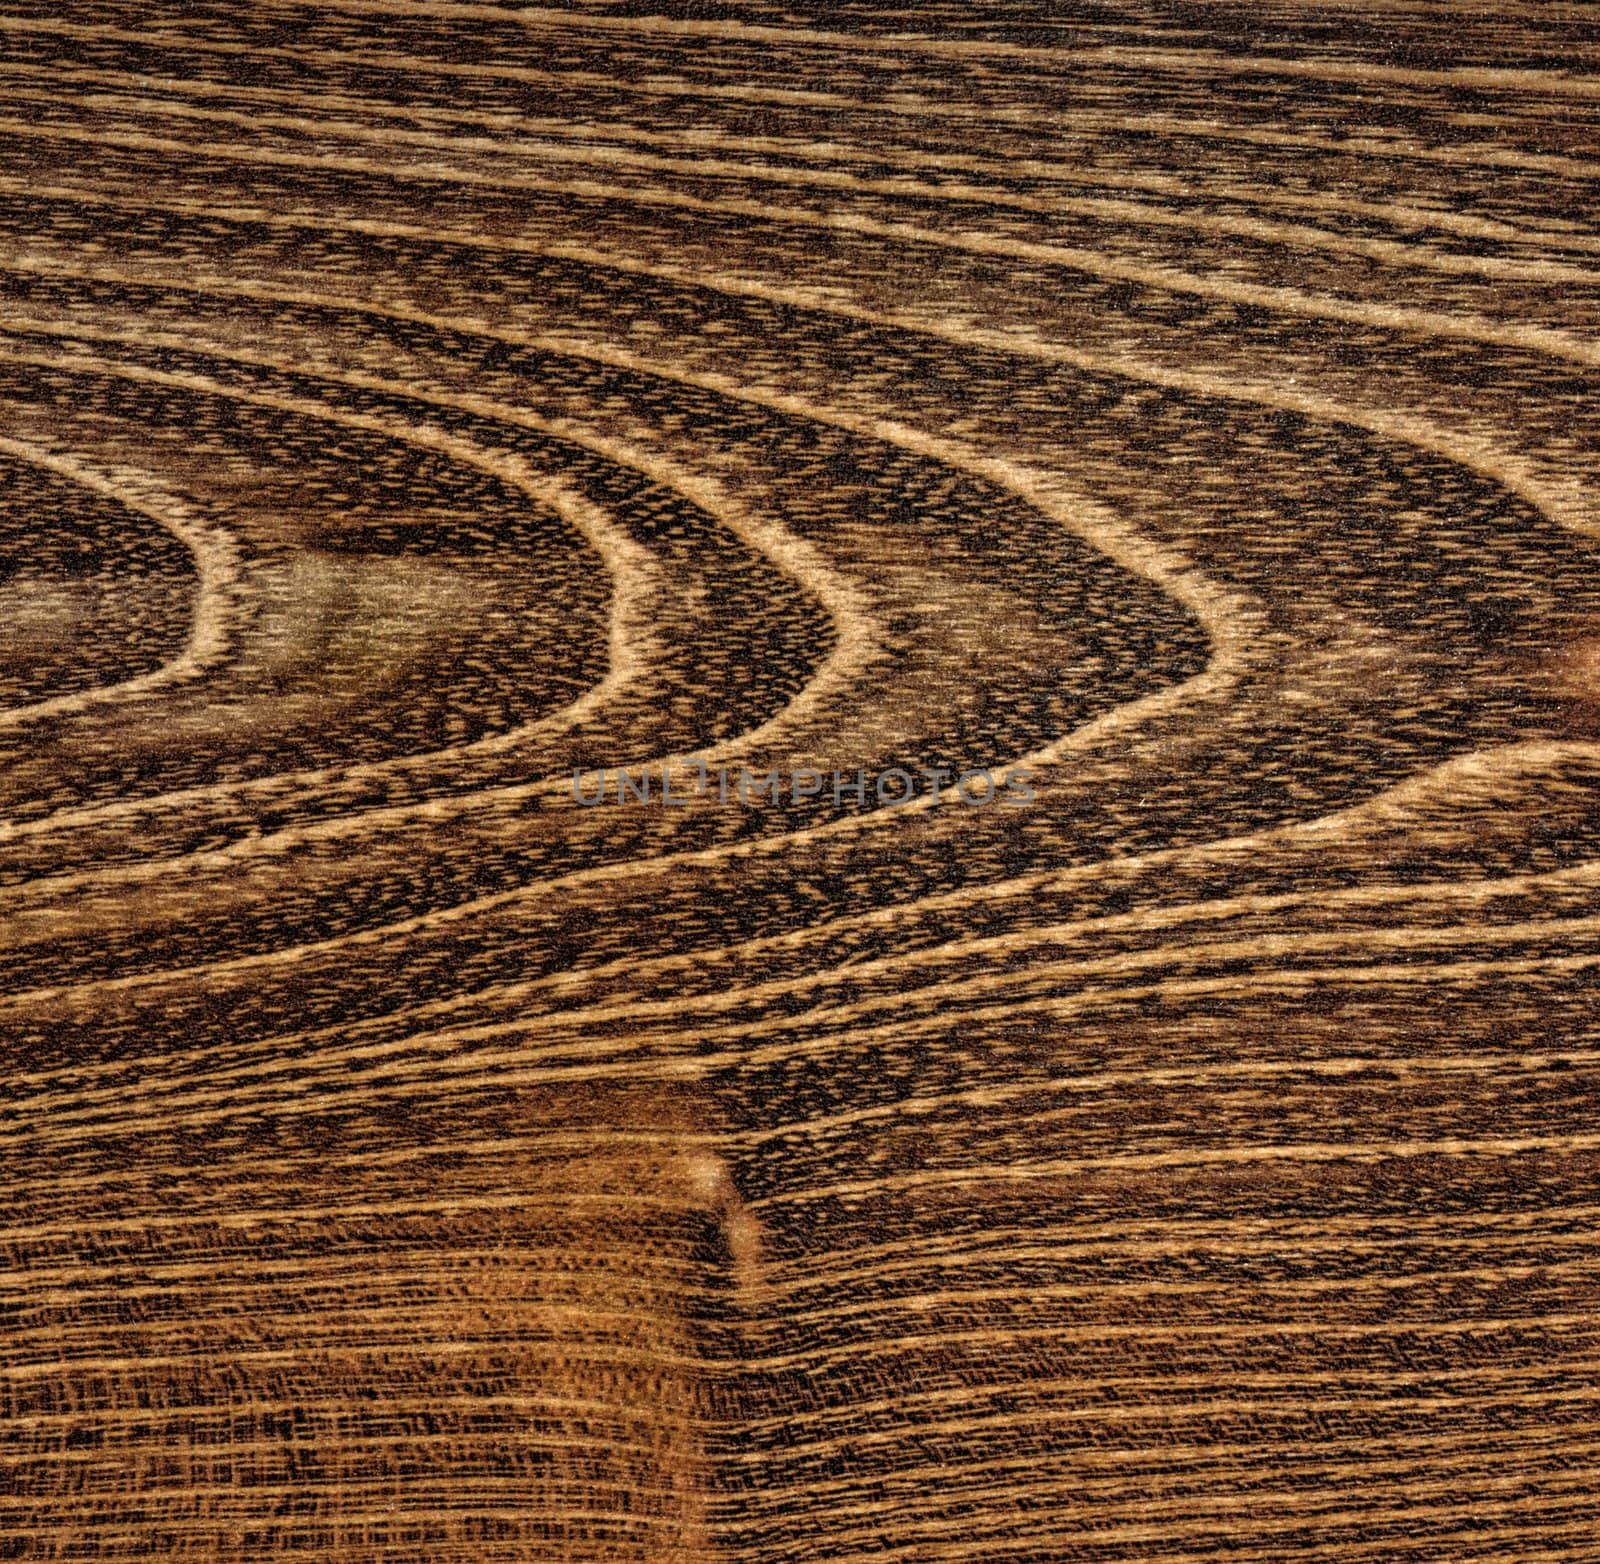 Abstract wooden background of a high contrast